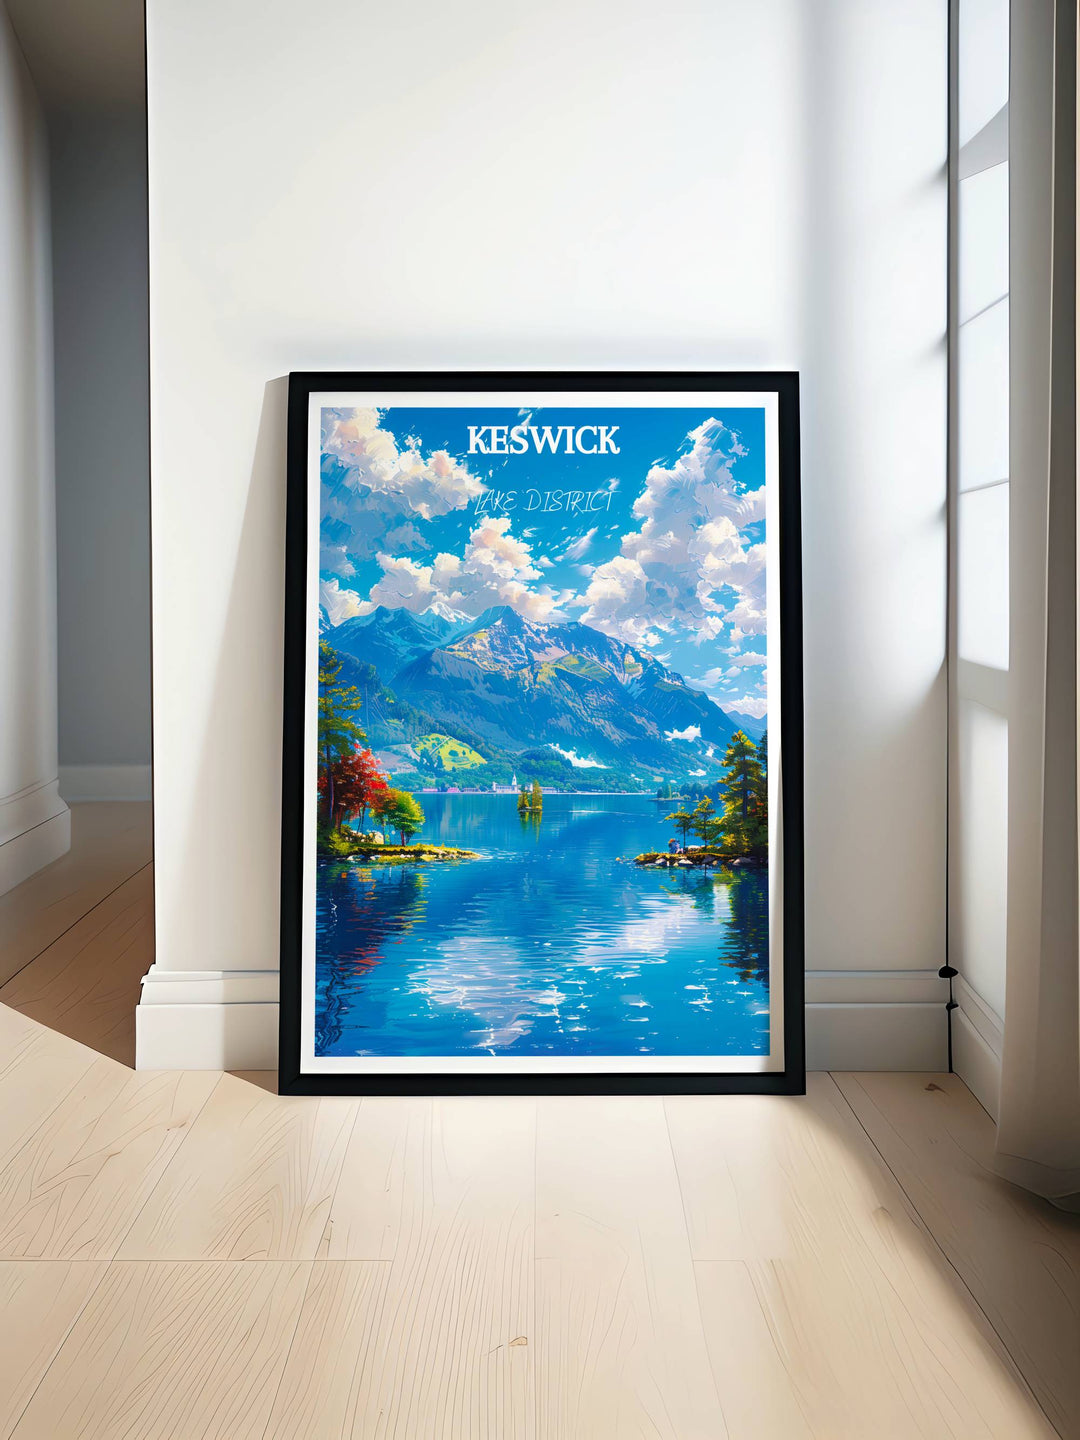 Vibrant abstract art print of Keswick Lake District, showcasing a fusion of bright colors that swirl and blend to mimic the dynamic natural forms of the landscape.